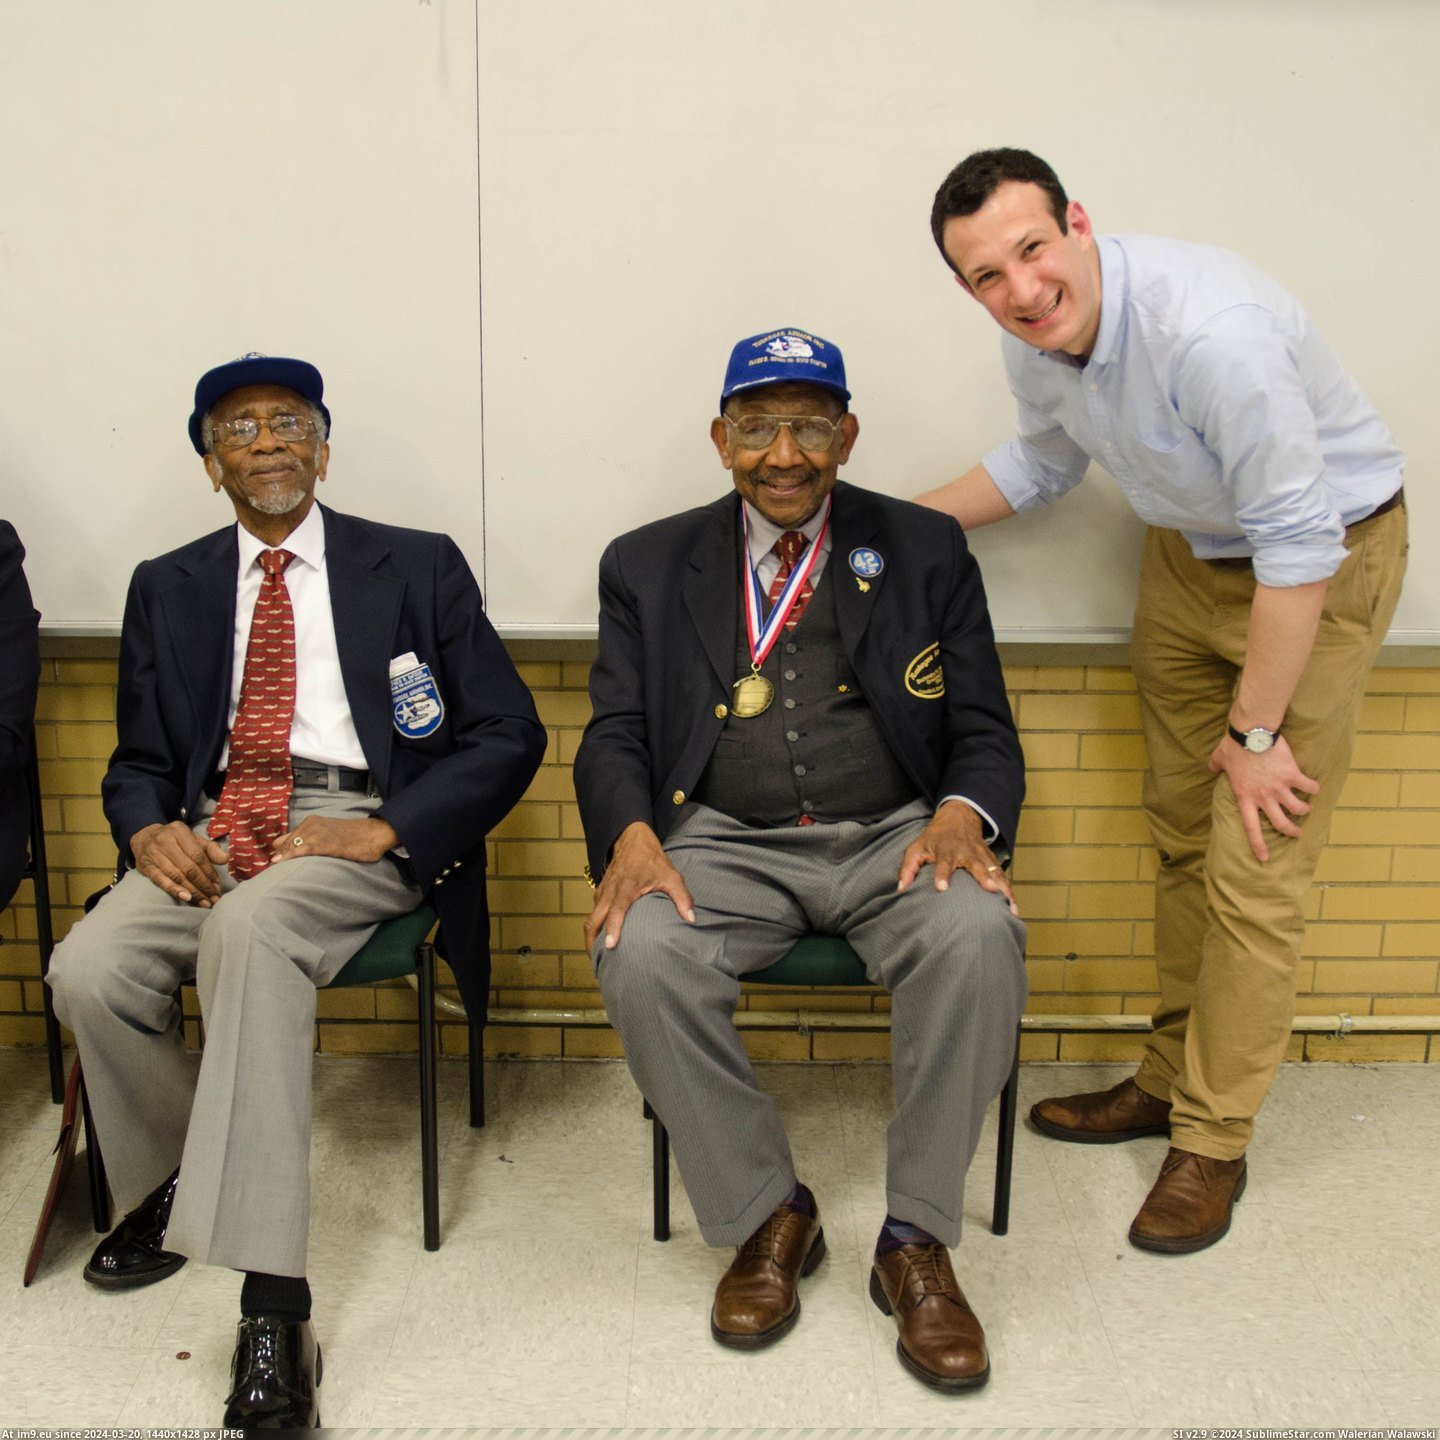 #Was #Teacher #American #Airmen #Tuskegee #History #Classes #Speak [Pics] I'm an American history teacher and was able to get 2 Tuskegee Airmen to come speak to my classes today Pic. (Image of album My r/PICS favs))